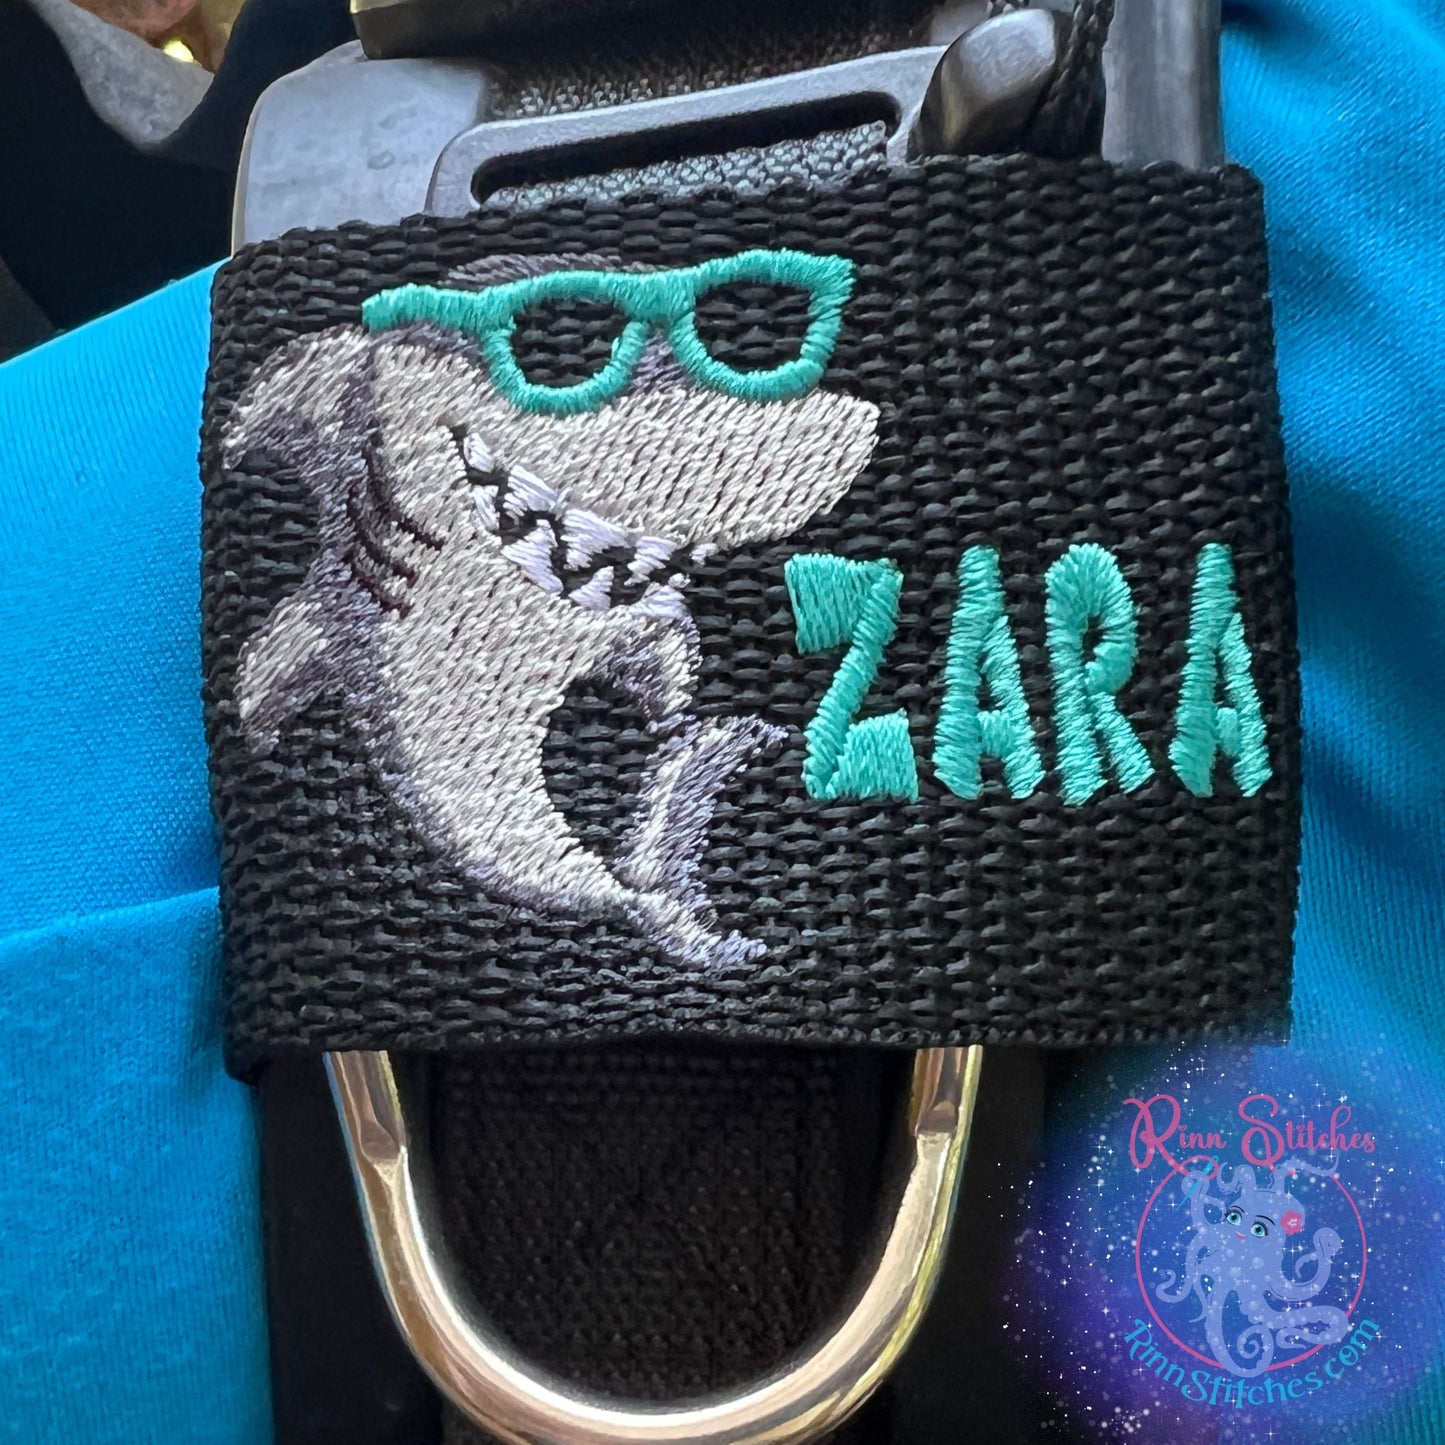 Cool Shark Personalized BCD Tag by Rinn Stitches on Maui, Hawaii - Small BCD Jacket Size (Scuba Pro Hydros, Zeagle Zena)